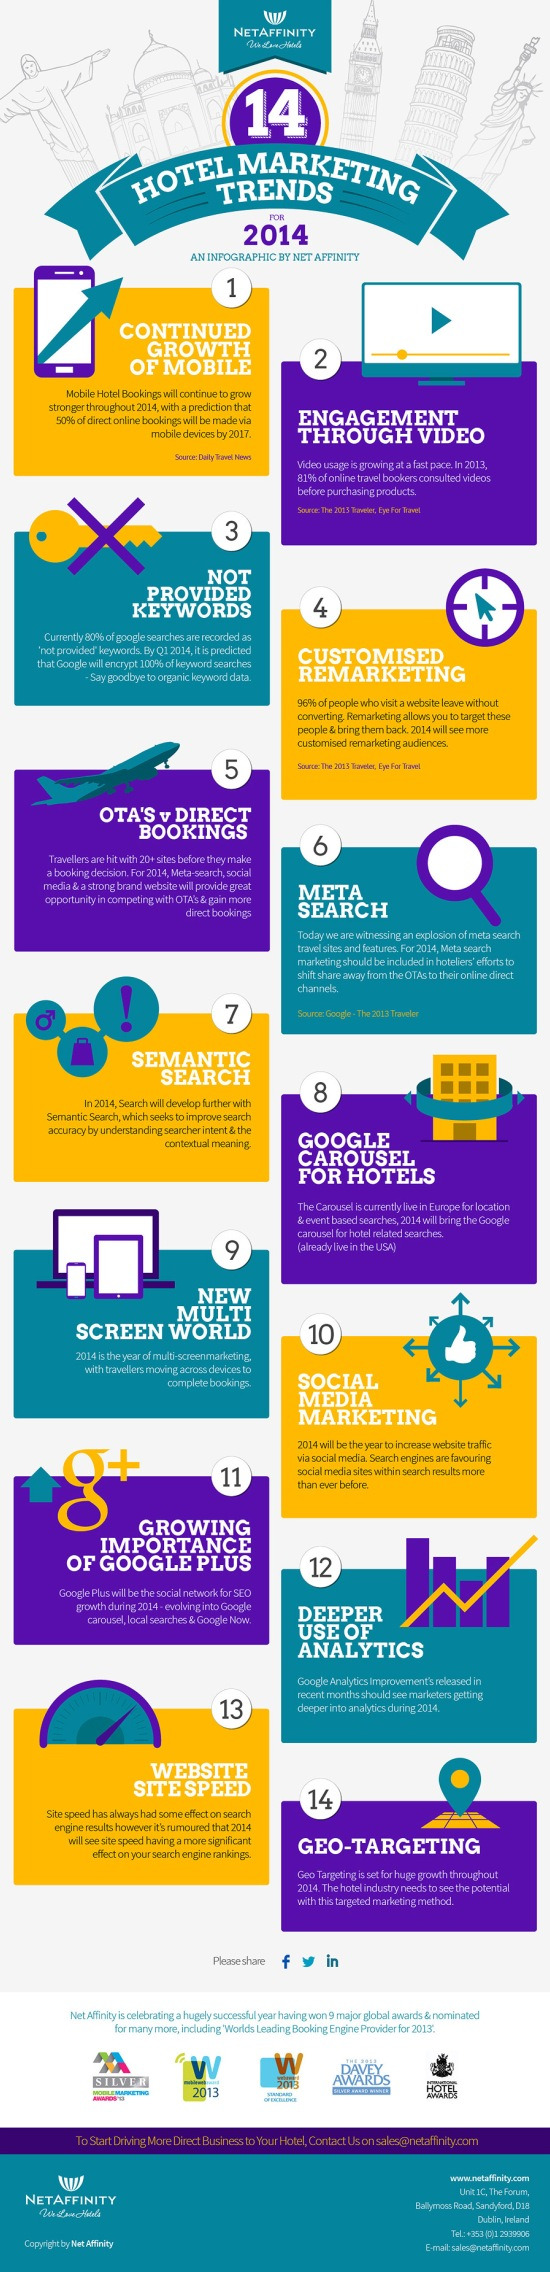 1. 14 Digital Marketing Trends for Hotels in 2014